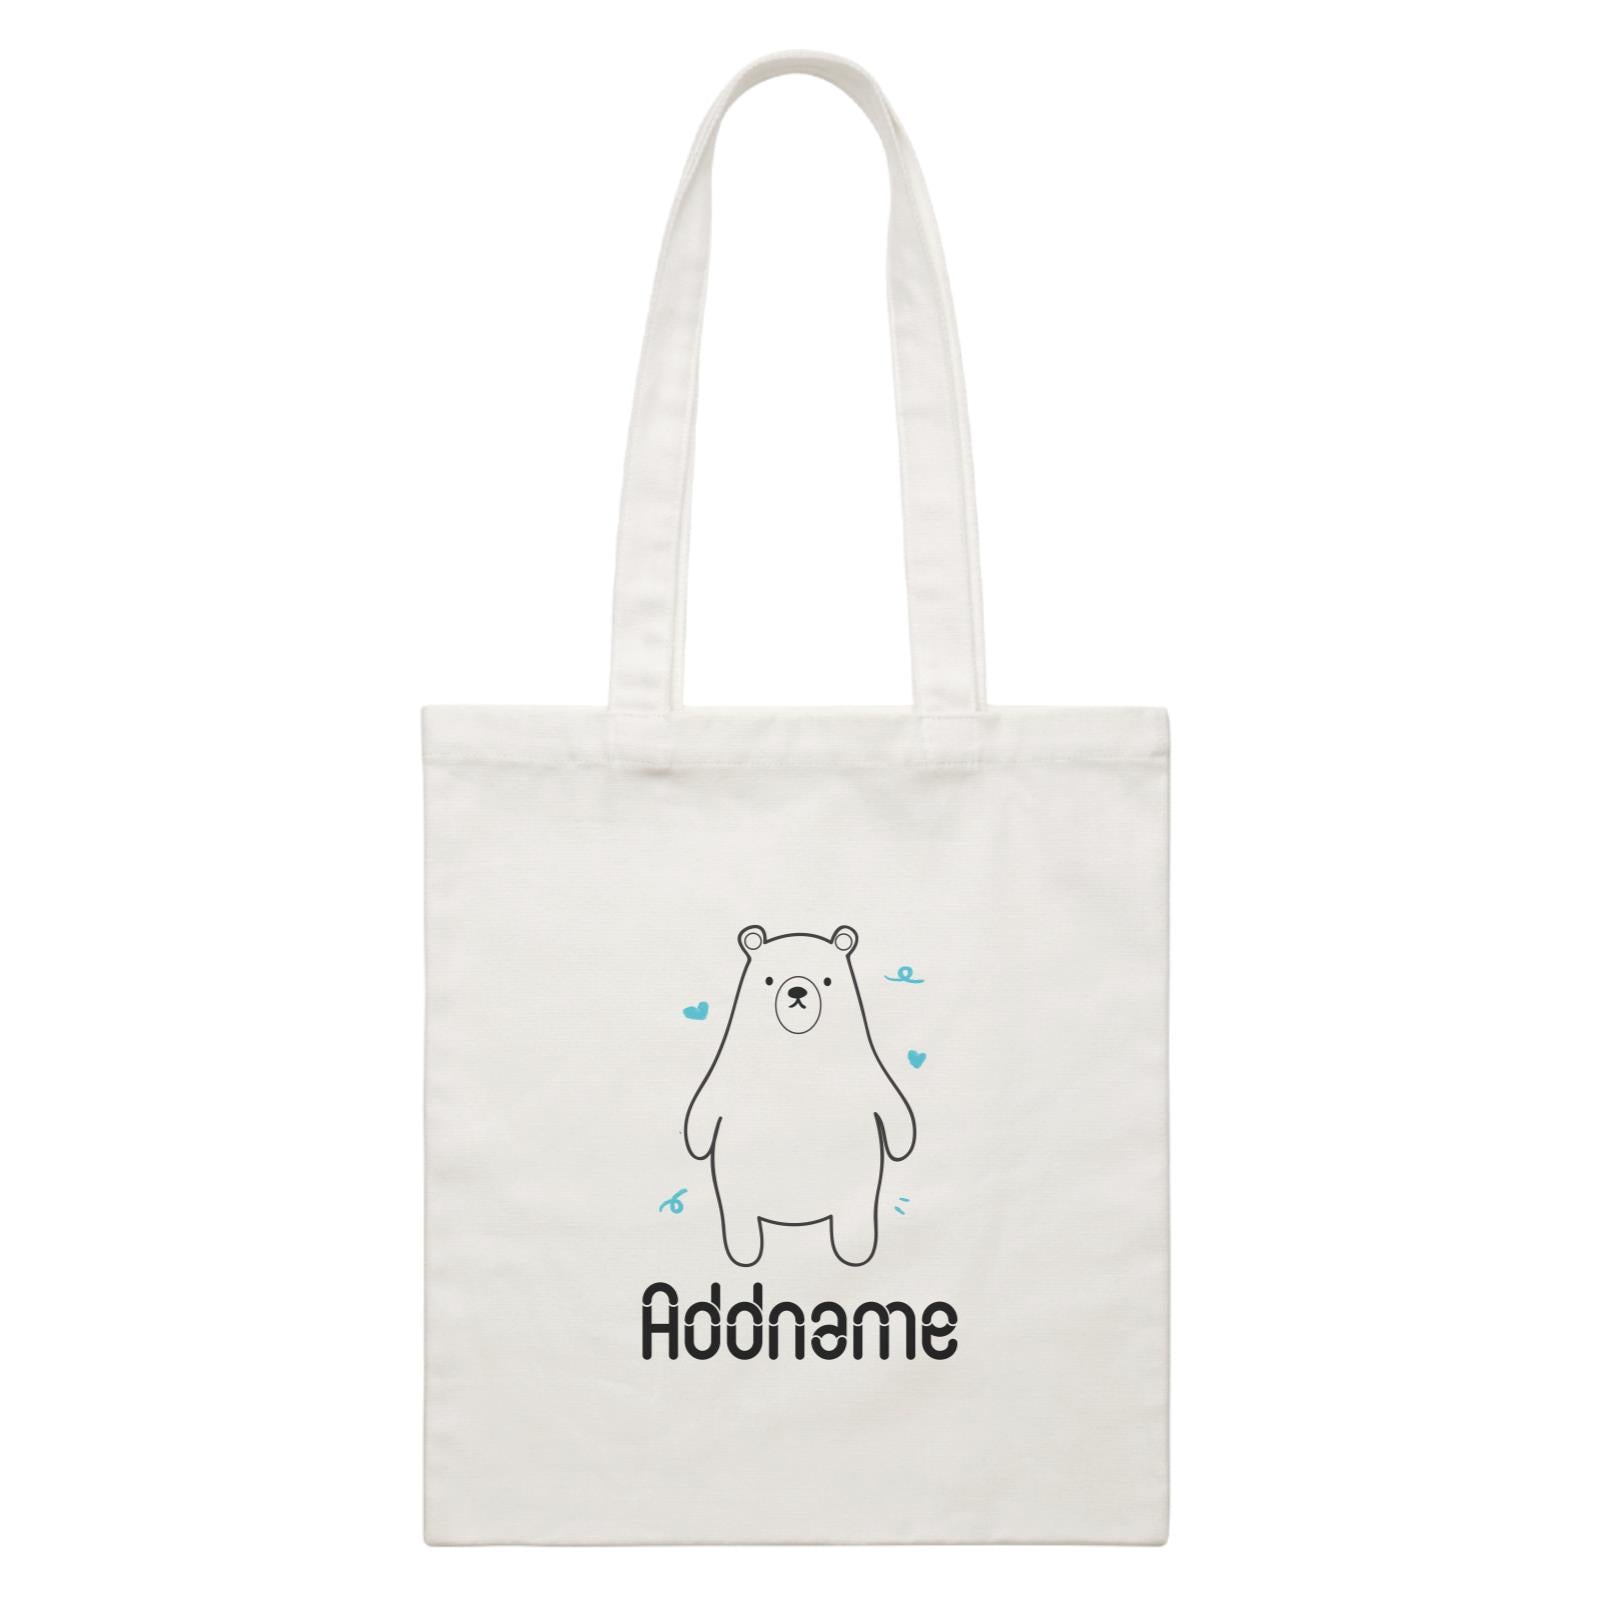 Coloring Outline Cute Hand Drawn Animals Cute Bear Addname White White Canvas Bag